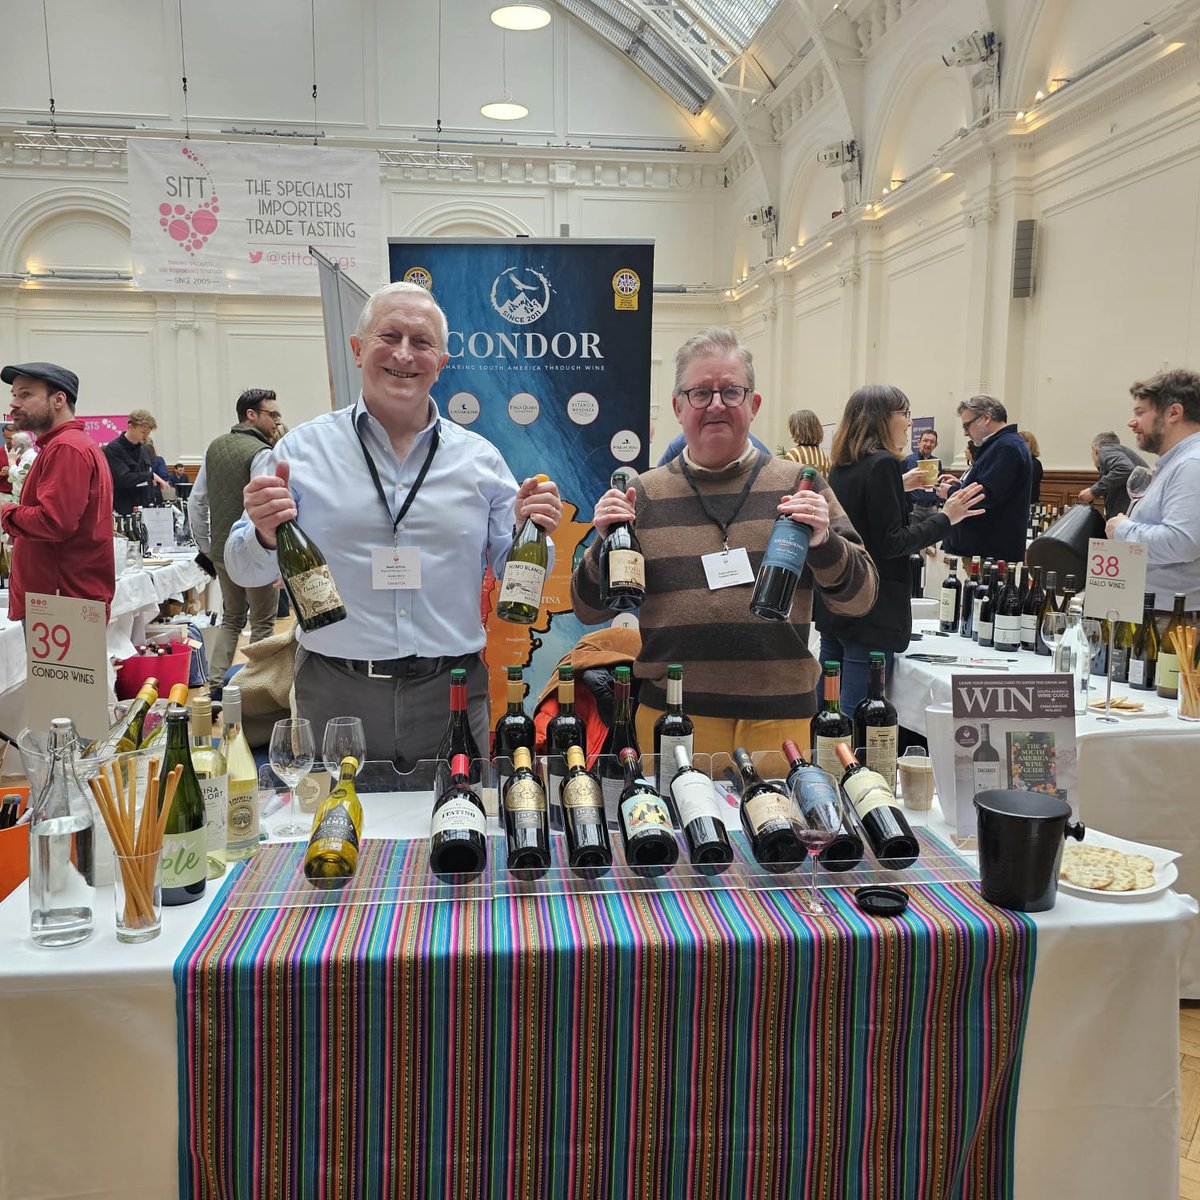 🚗 Condor on Tour! 🚗 

Cracking day at @sittastings in #London! 🤩

Great to see so many people. Thank you to everyone who stopped by to taste, talk and say nice things about our wines 👏

#condorontour #SITTSpring #condorwines #importer #wine #winetasting #southamericanwines